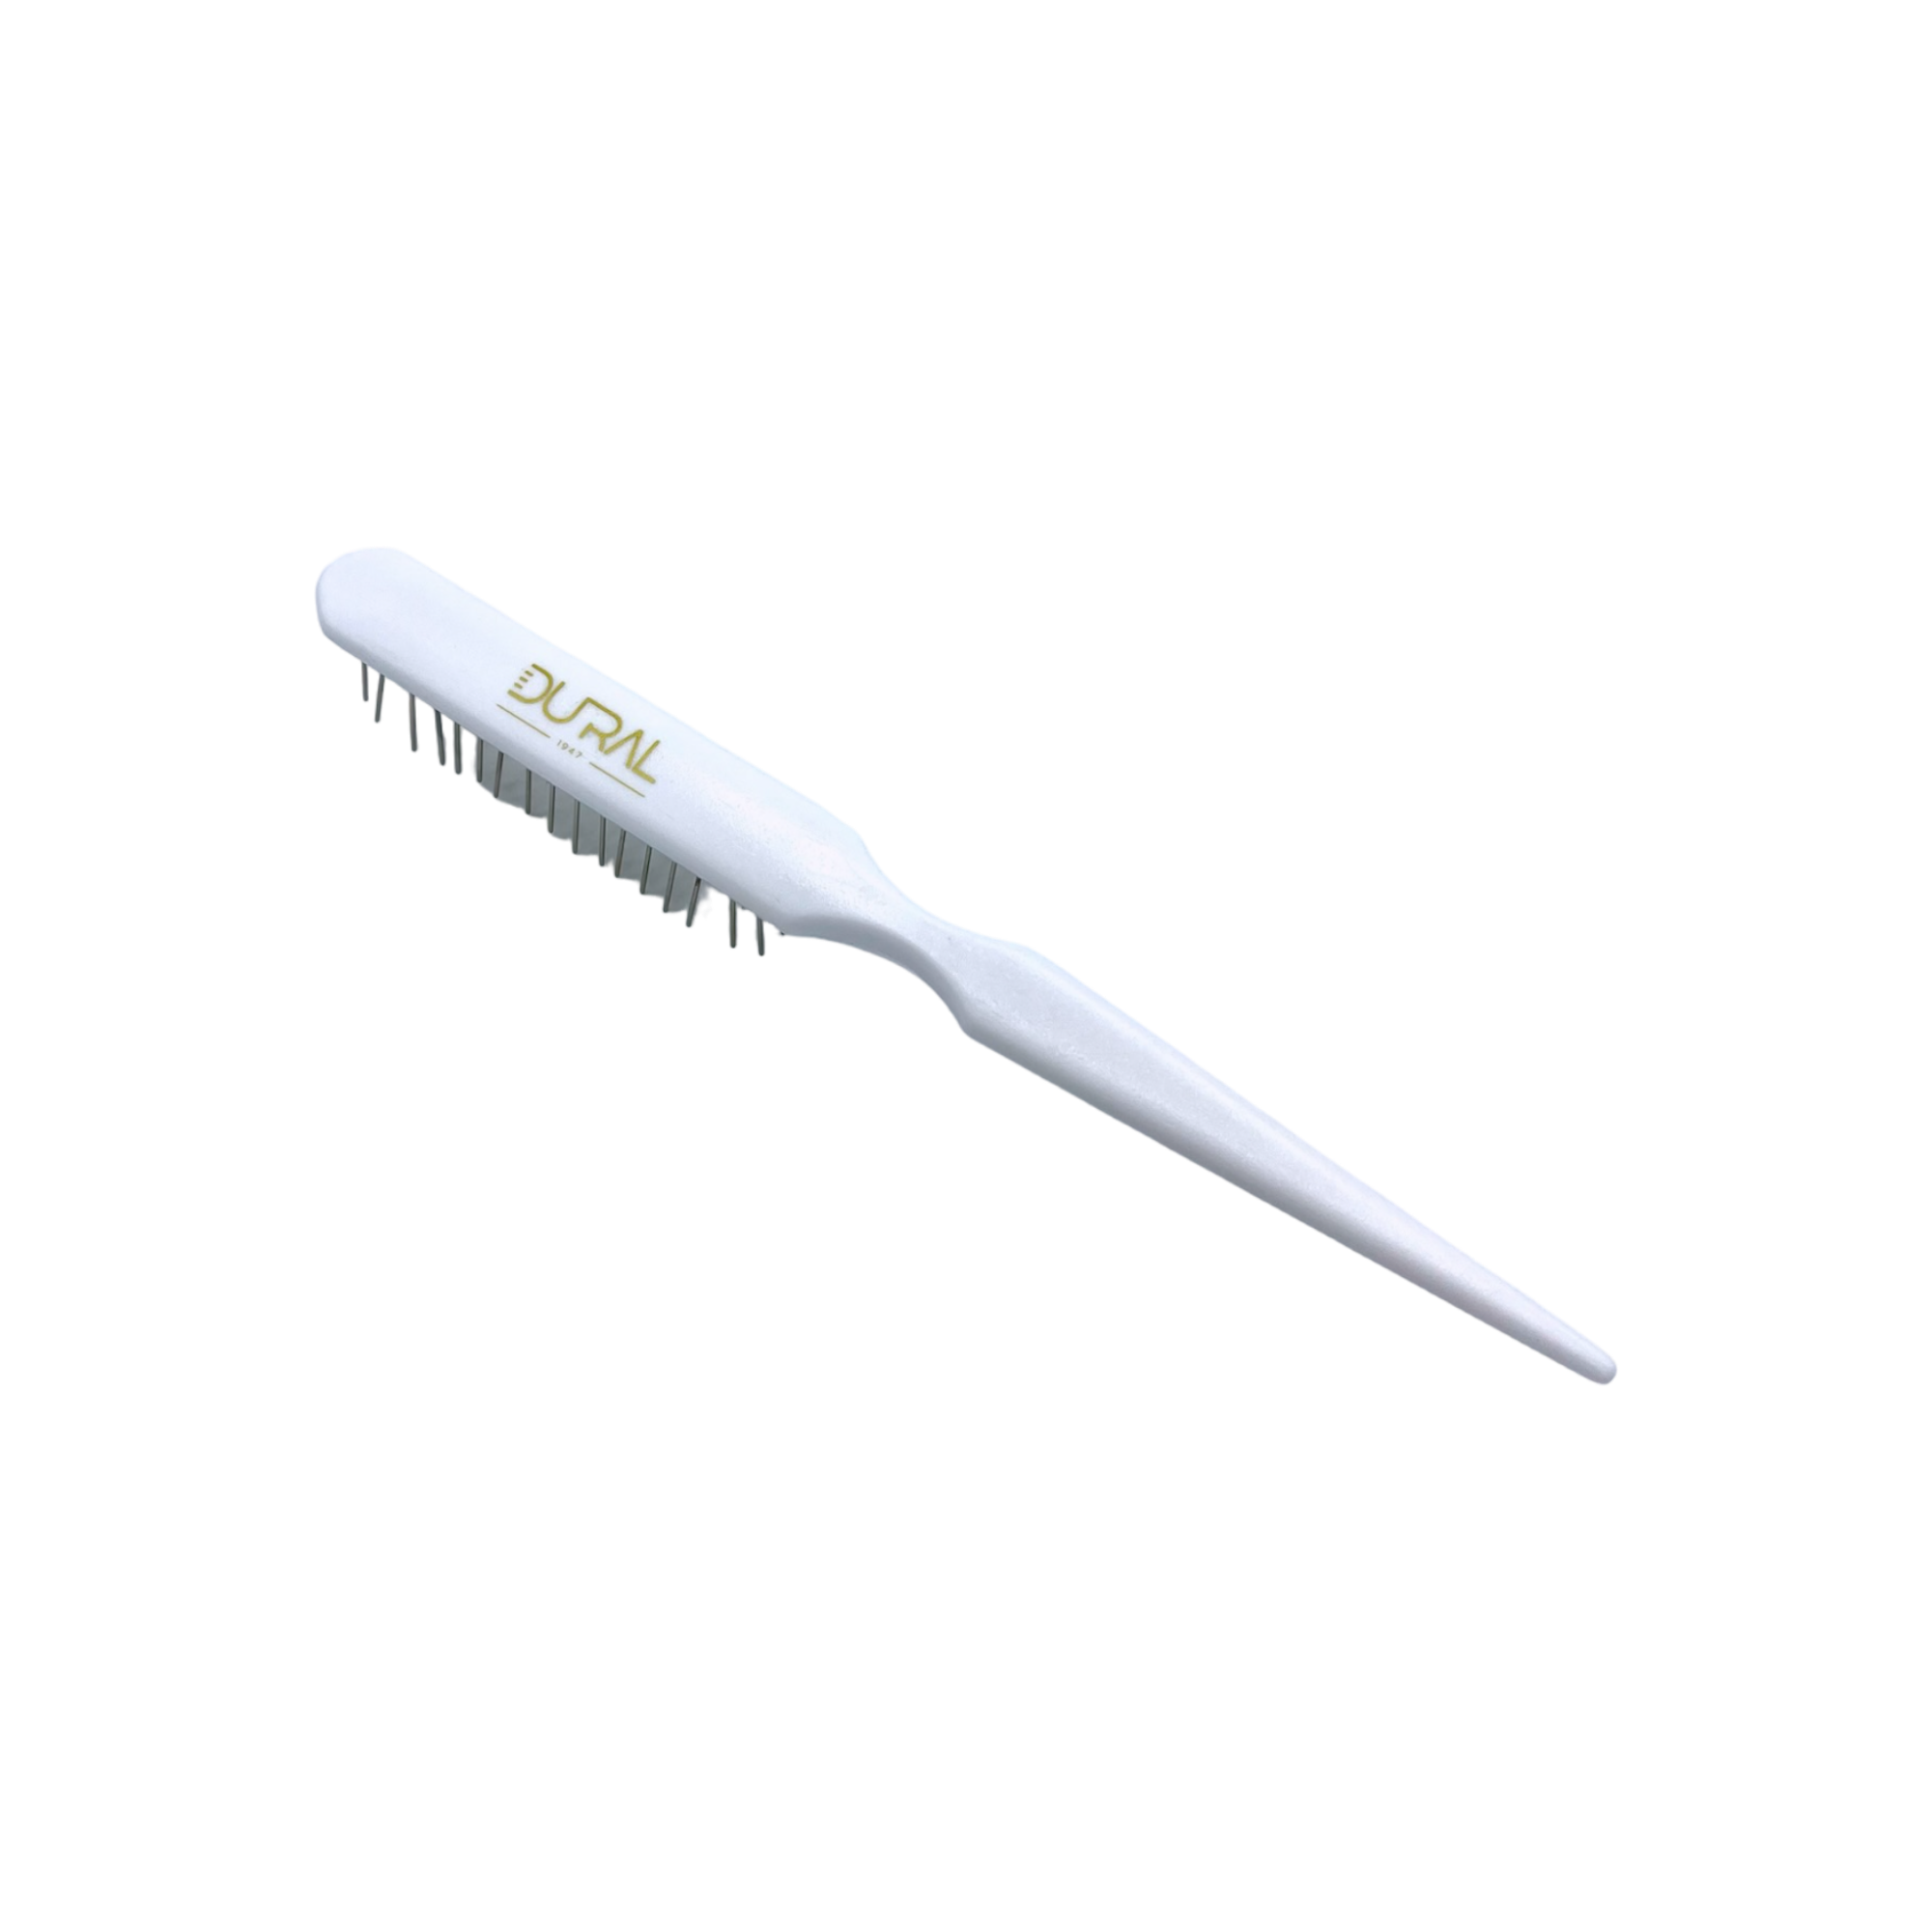 Dural back combing hair brush with steel pins